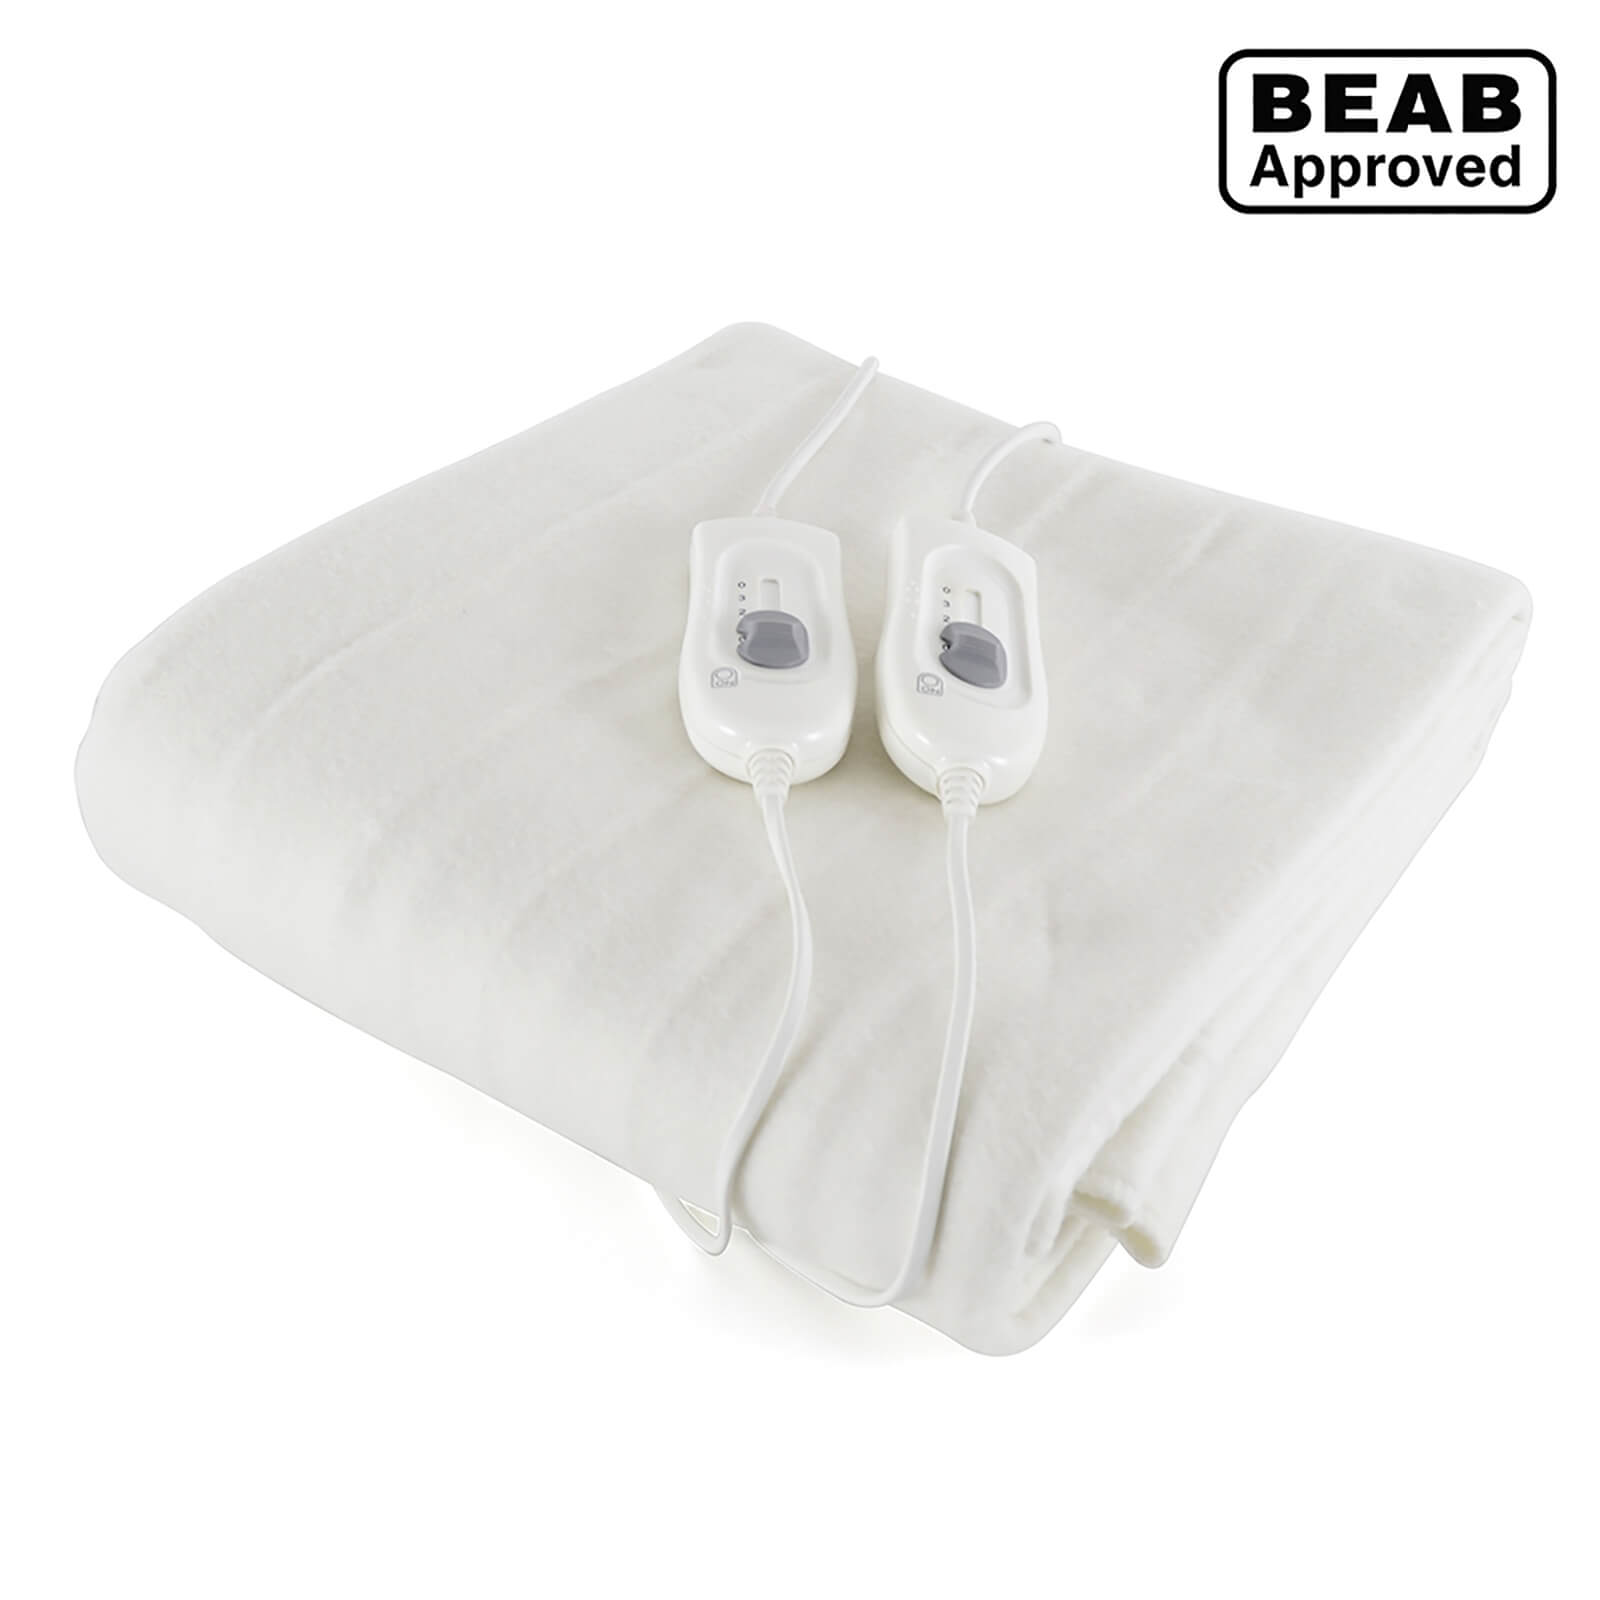 StayWarm Superior Electric Blanket - Double (BEAB Approved)